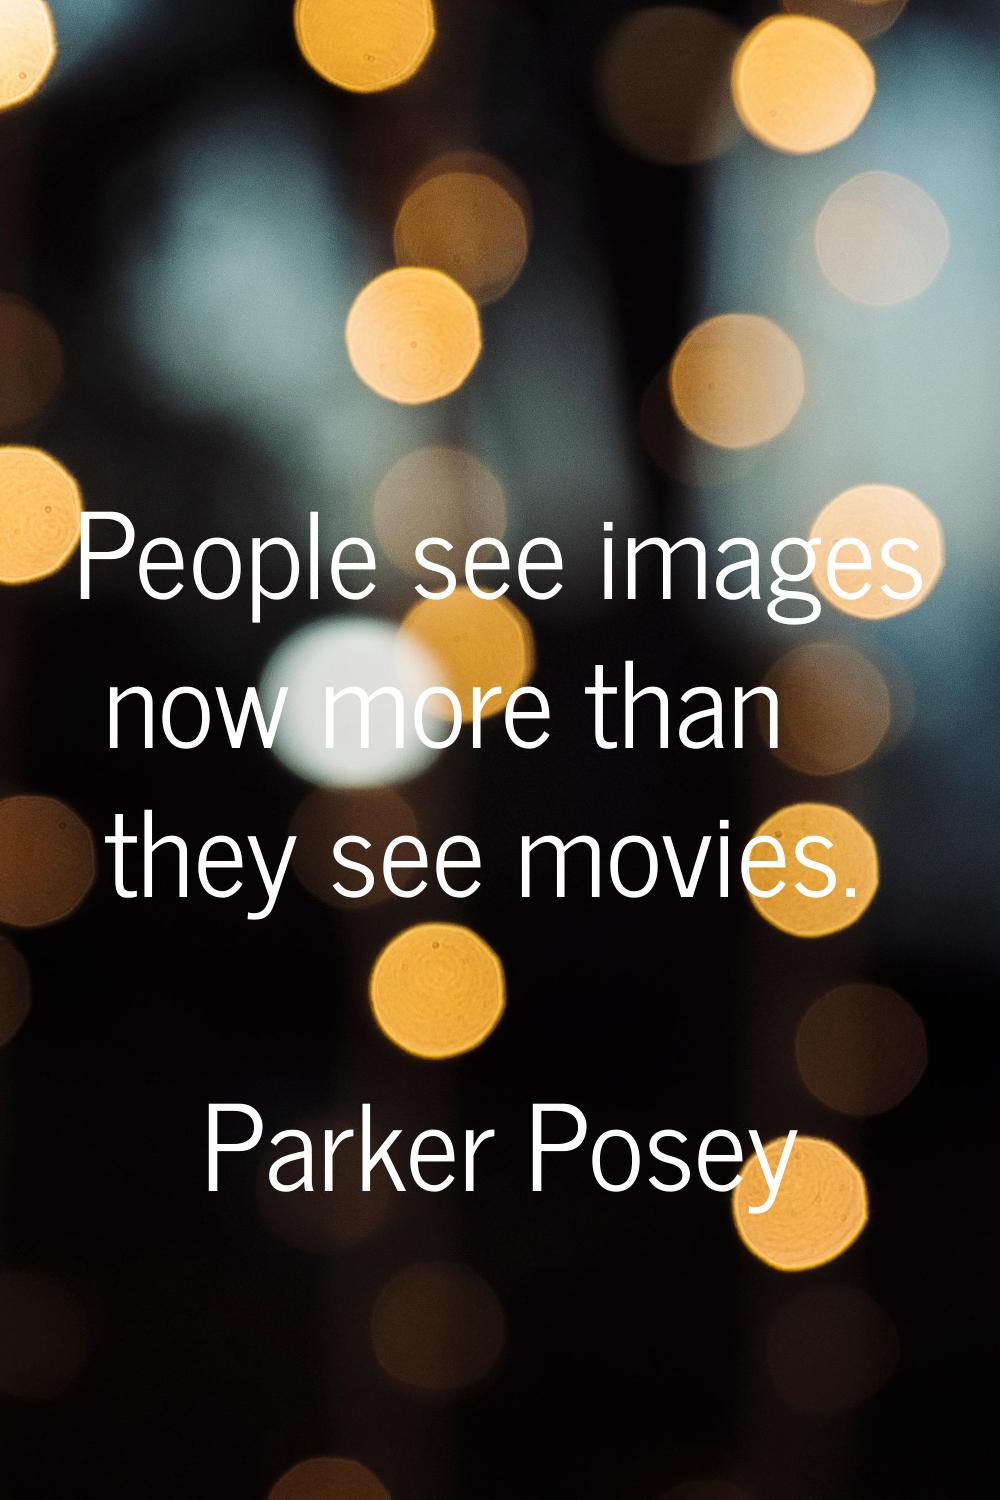 People see images now more than they see movies.